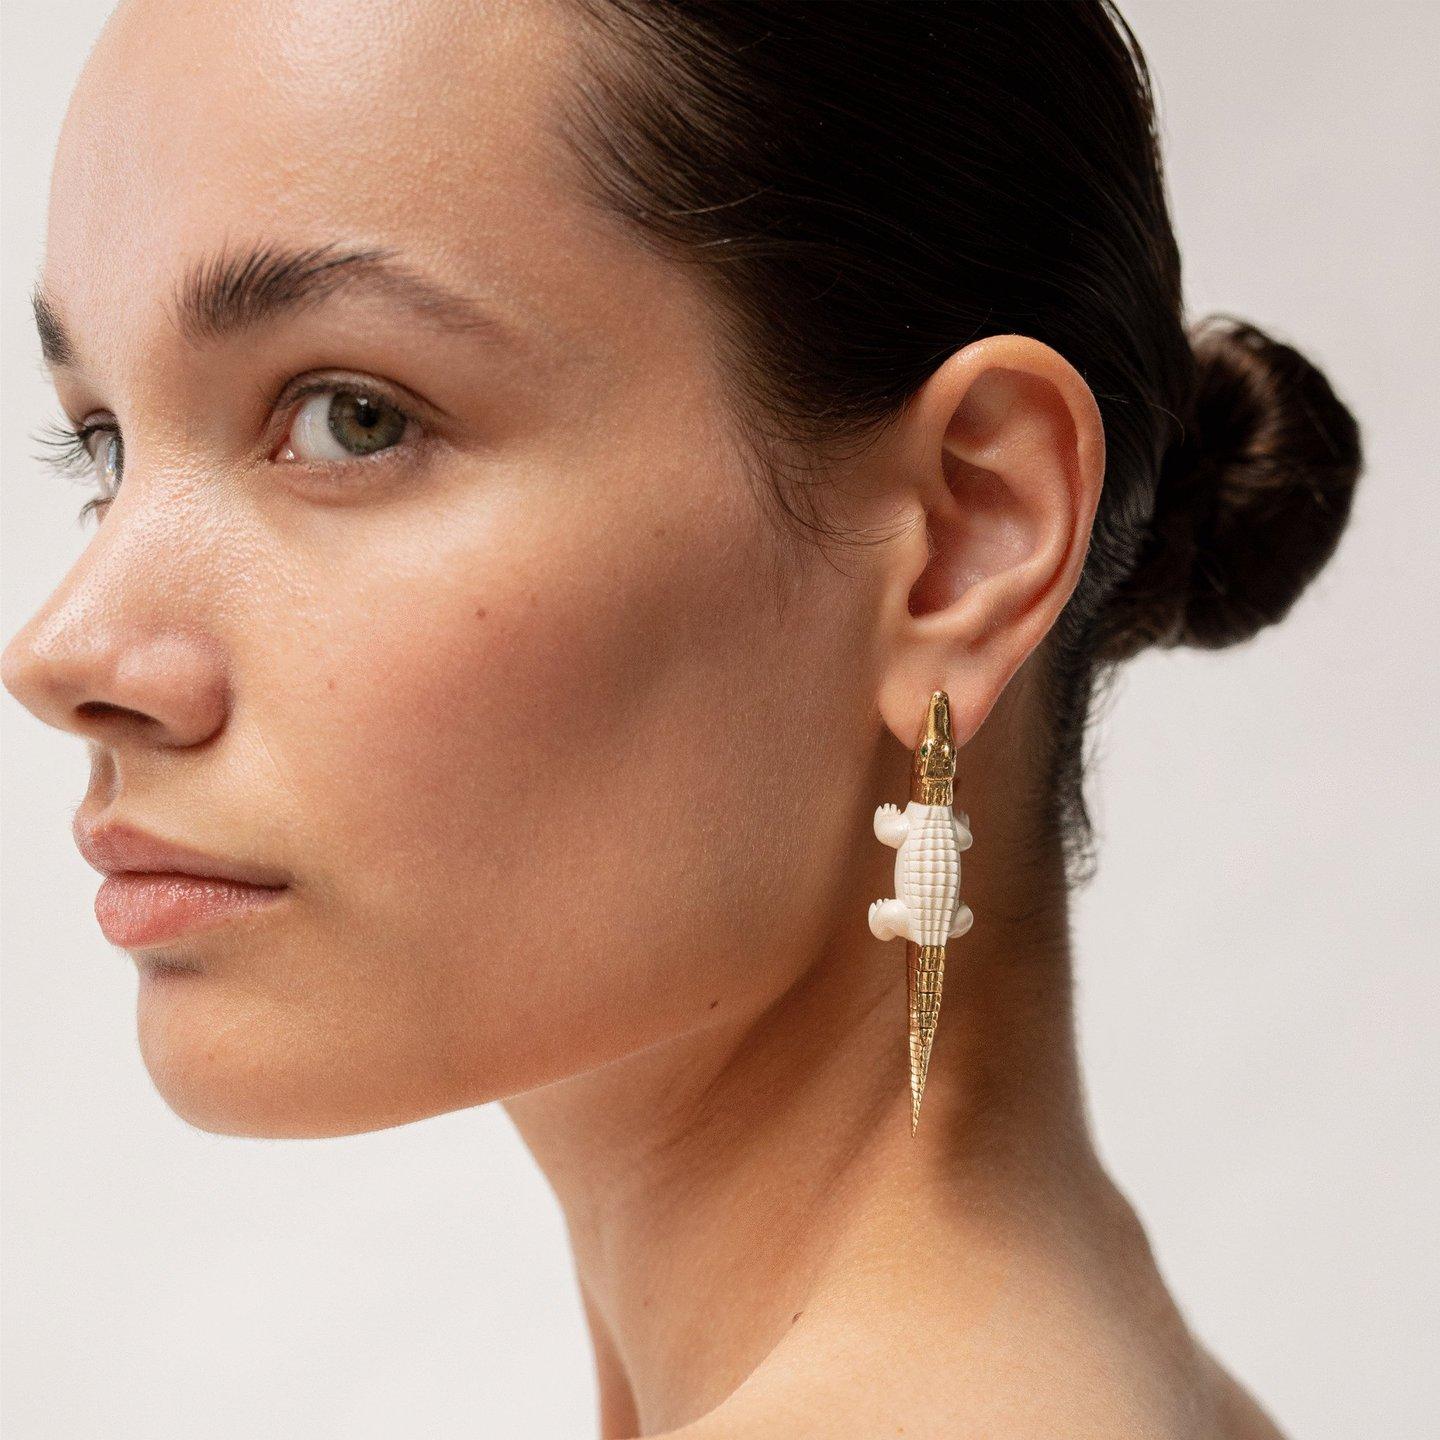 Intricately carved to replicate an alligator’s body in miniature, this earring conveys a fierce glamour. The earring is designed in 18k yellow gold and 60,000-year-old mammoth tusk, with the alligator’s mouth acting as the earring’s closing